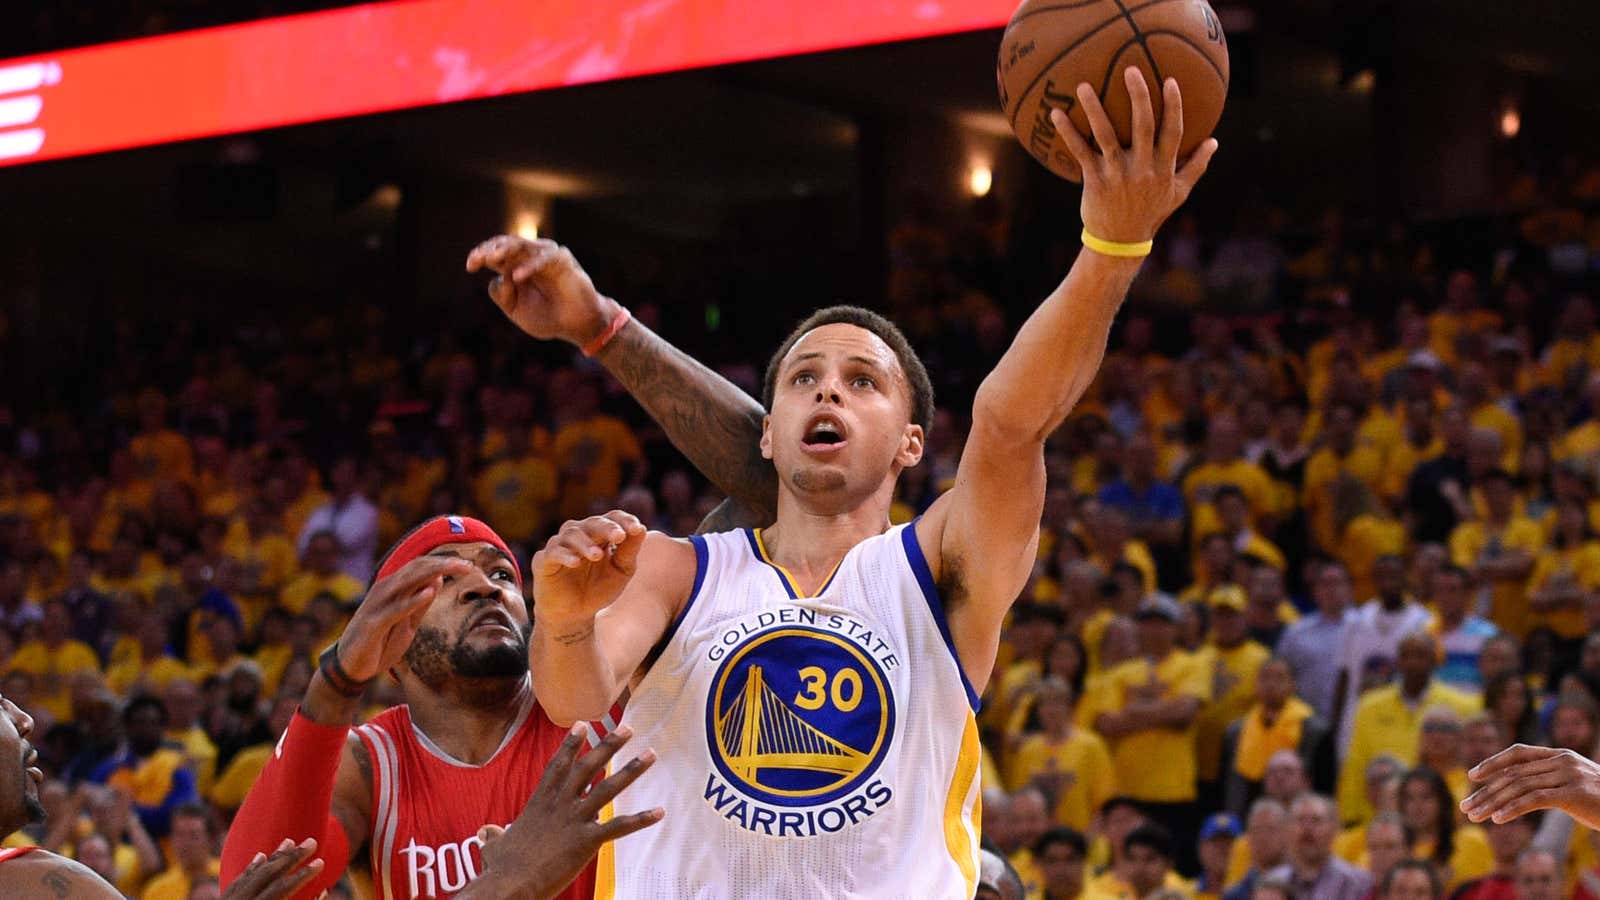 The MVP Stephen Curry led his Golden State Warriors to the best record in the league